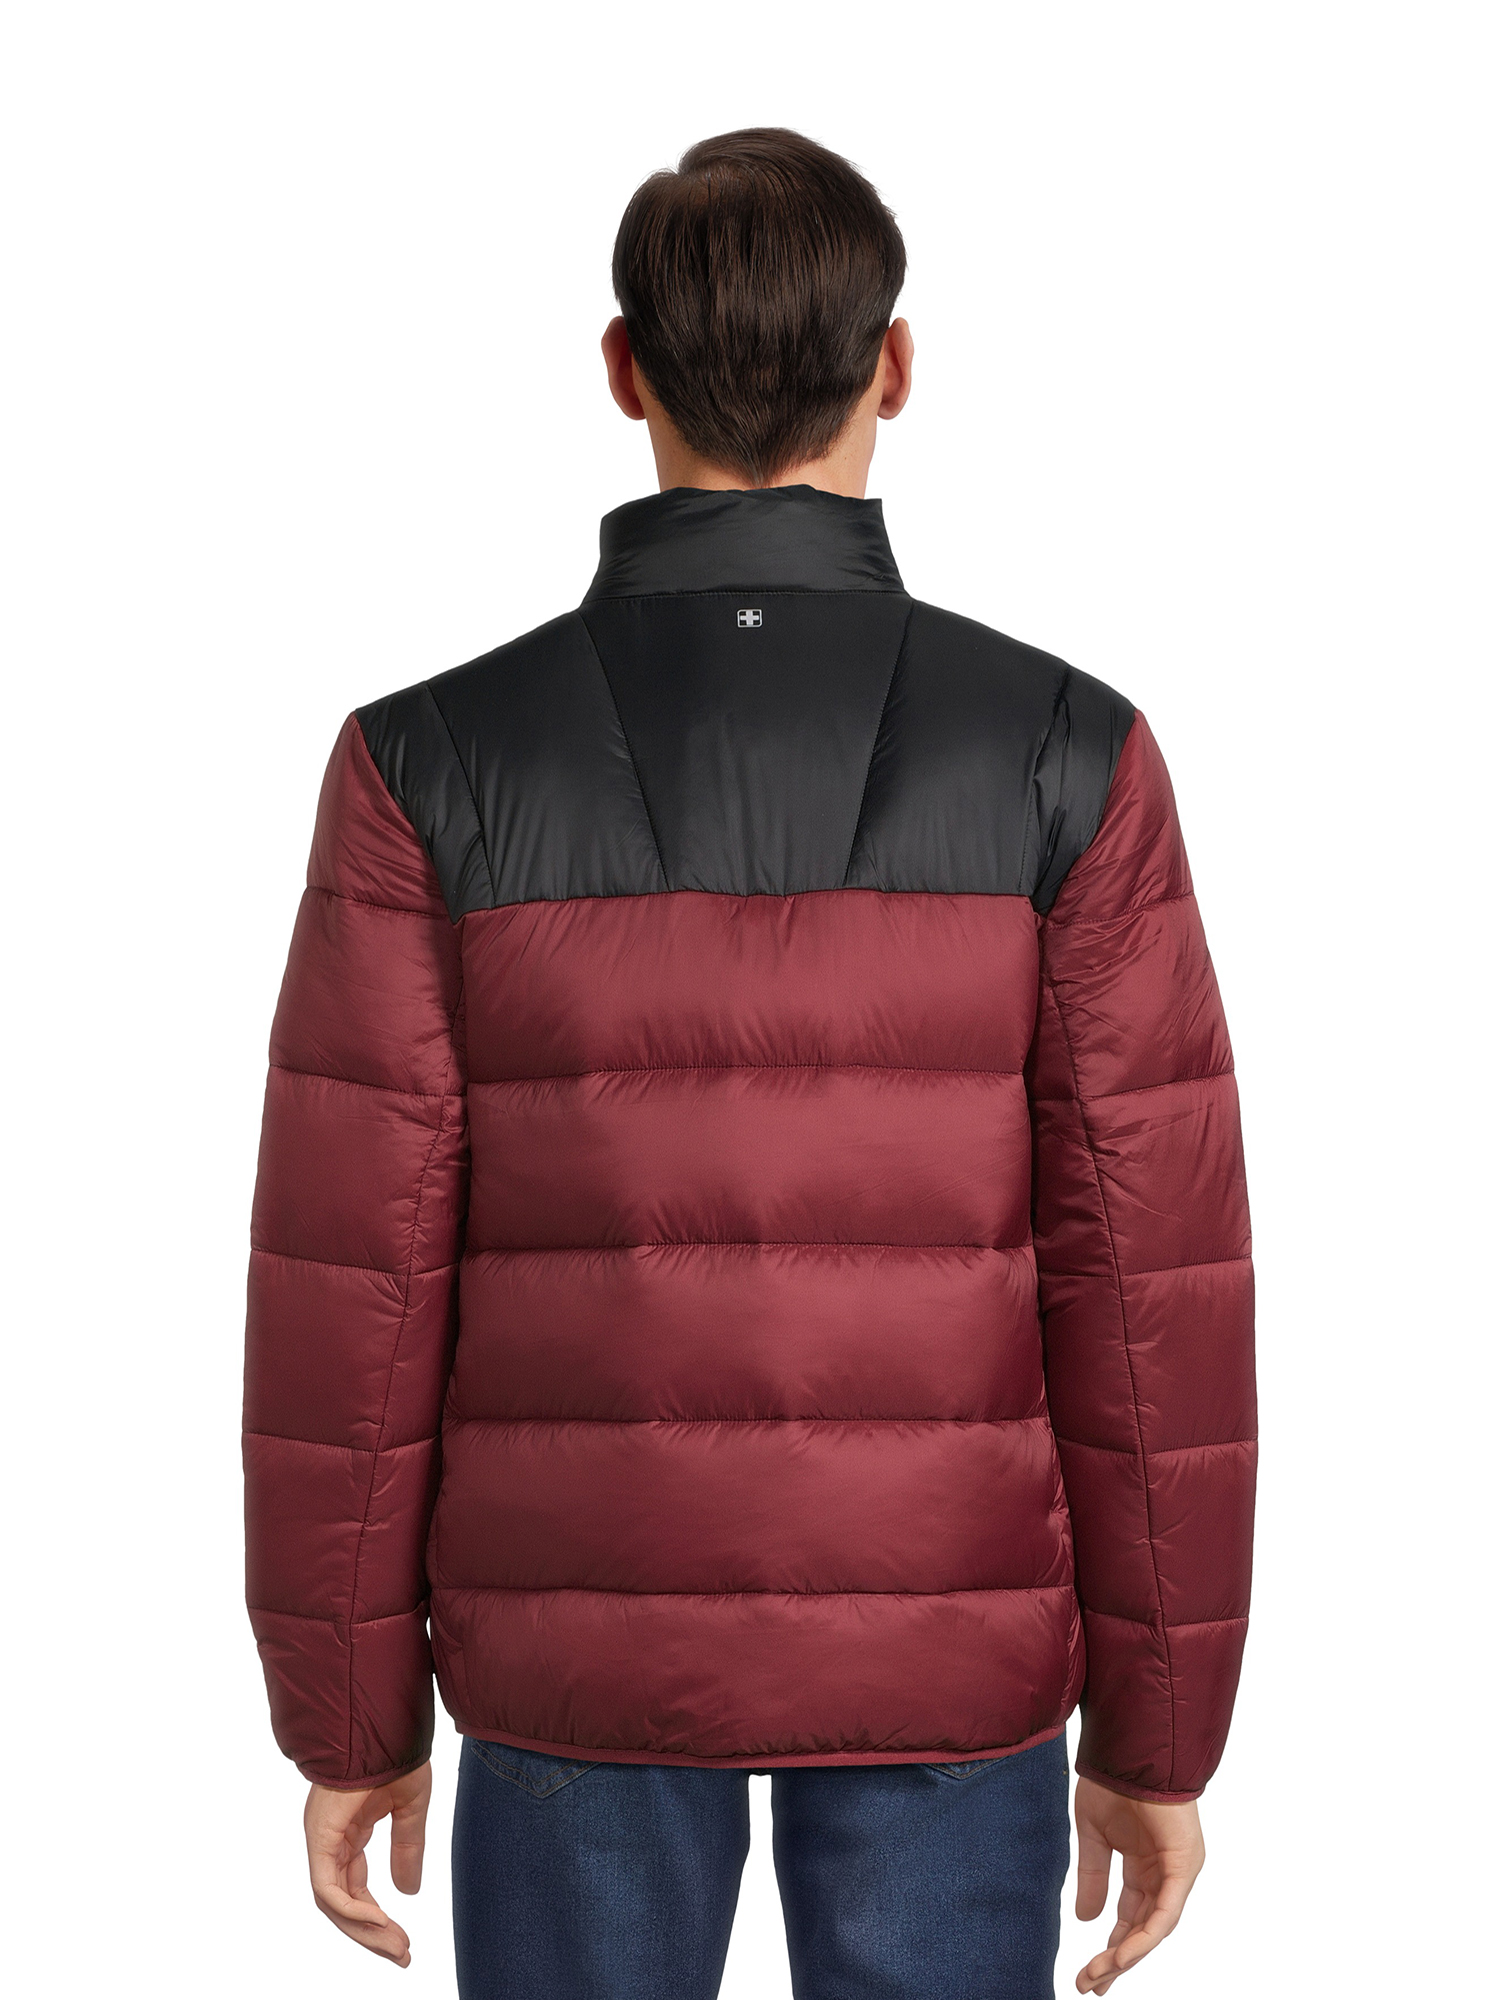 Swiss Tech Men's and Big Men's Packable Puffer Jacket, Sizes S-3XL - image 4 of 6